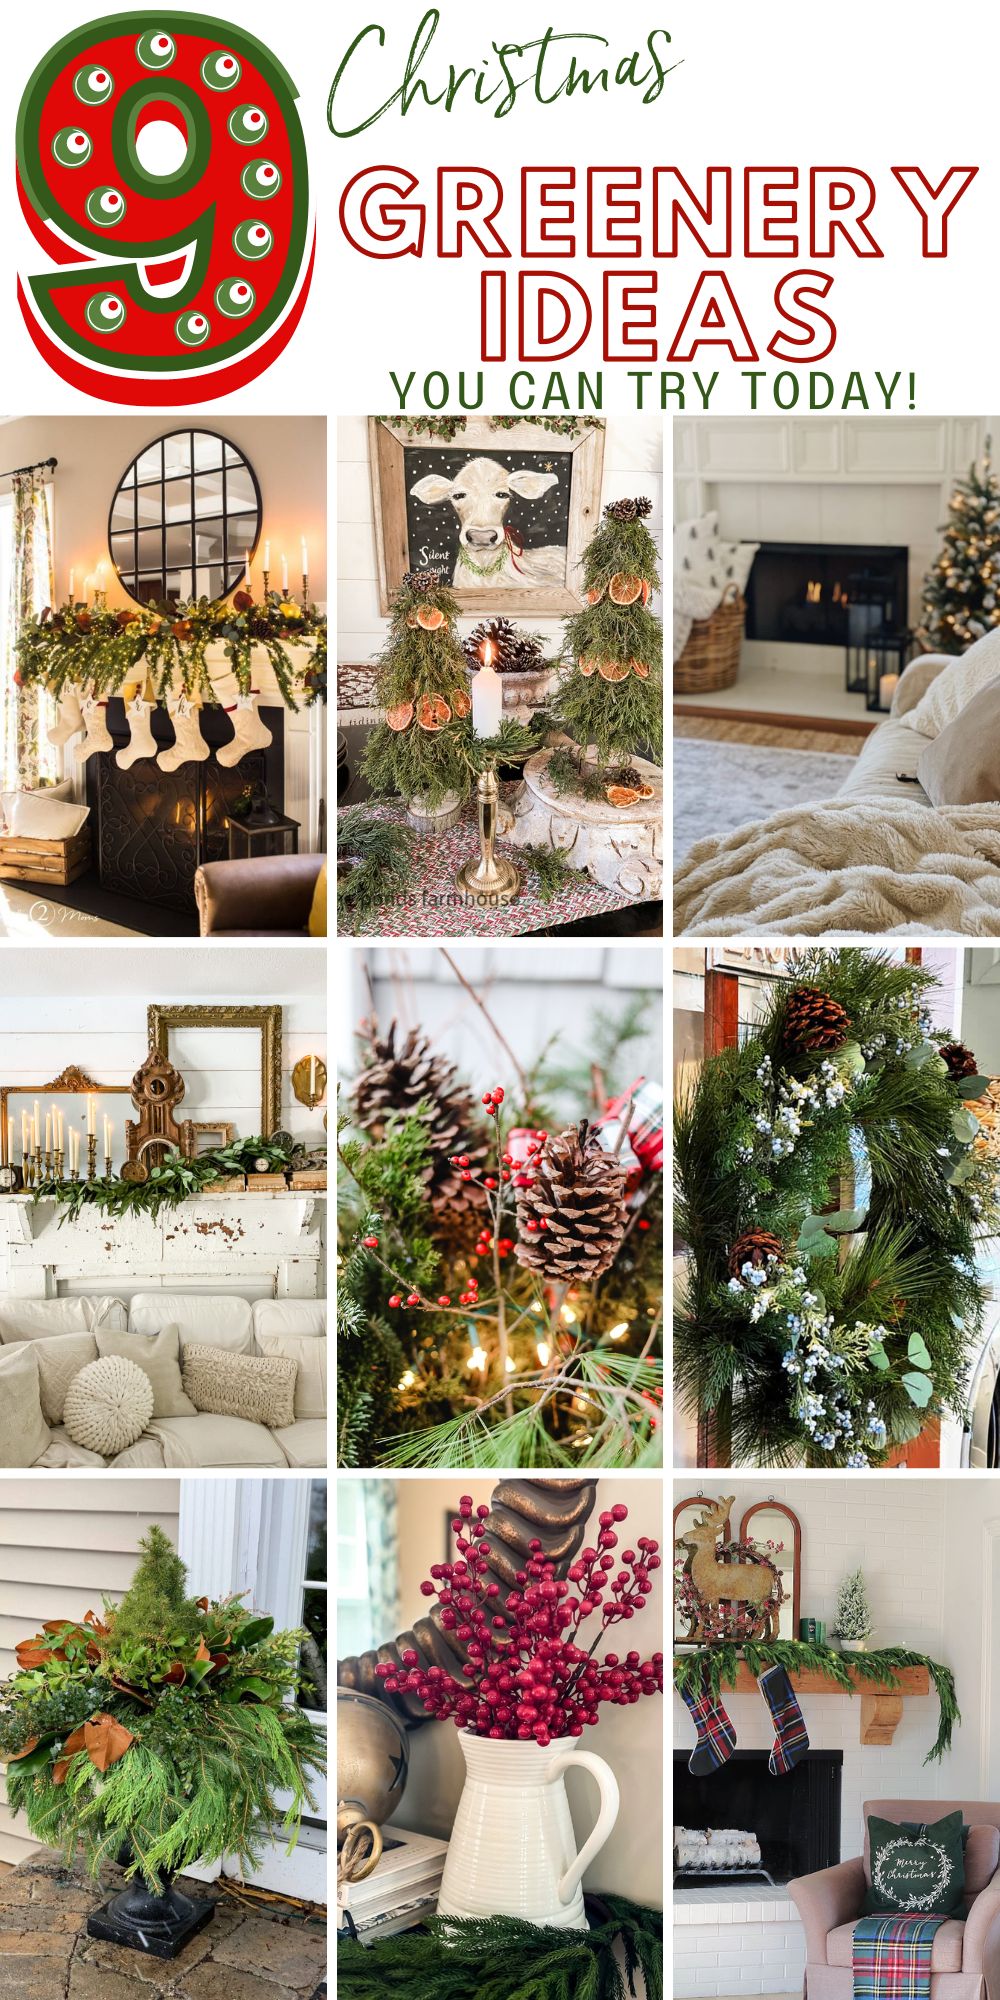 How To Use Winter Greenery In Your Home (Indoor And Outdoor Ideas)